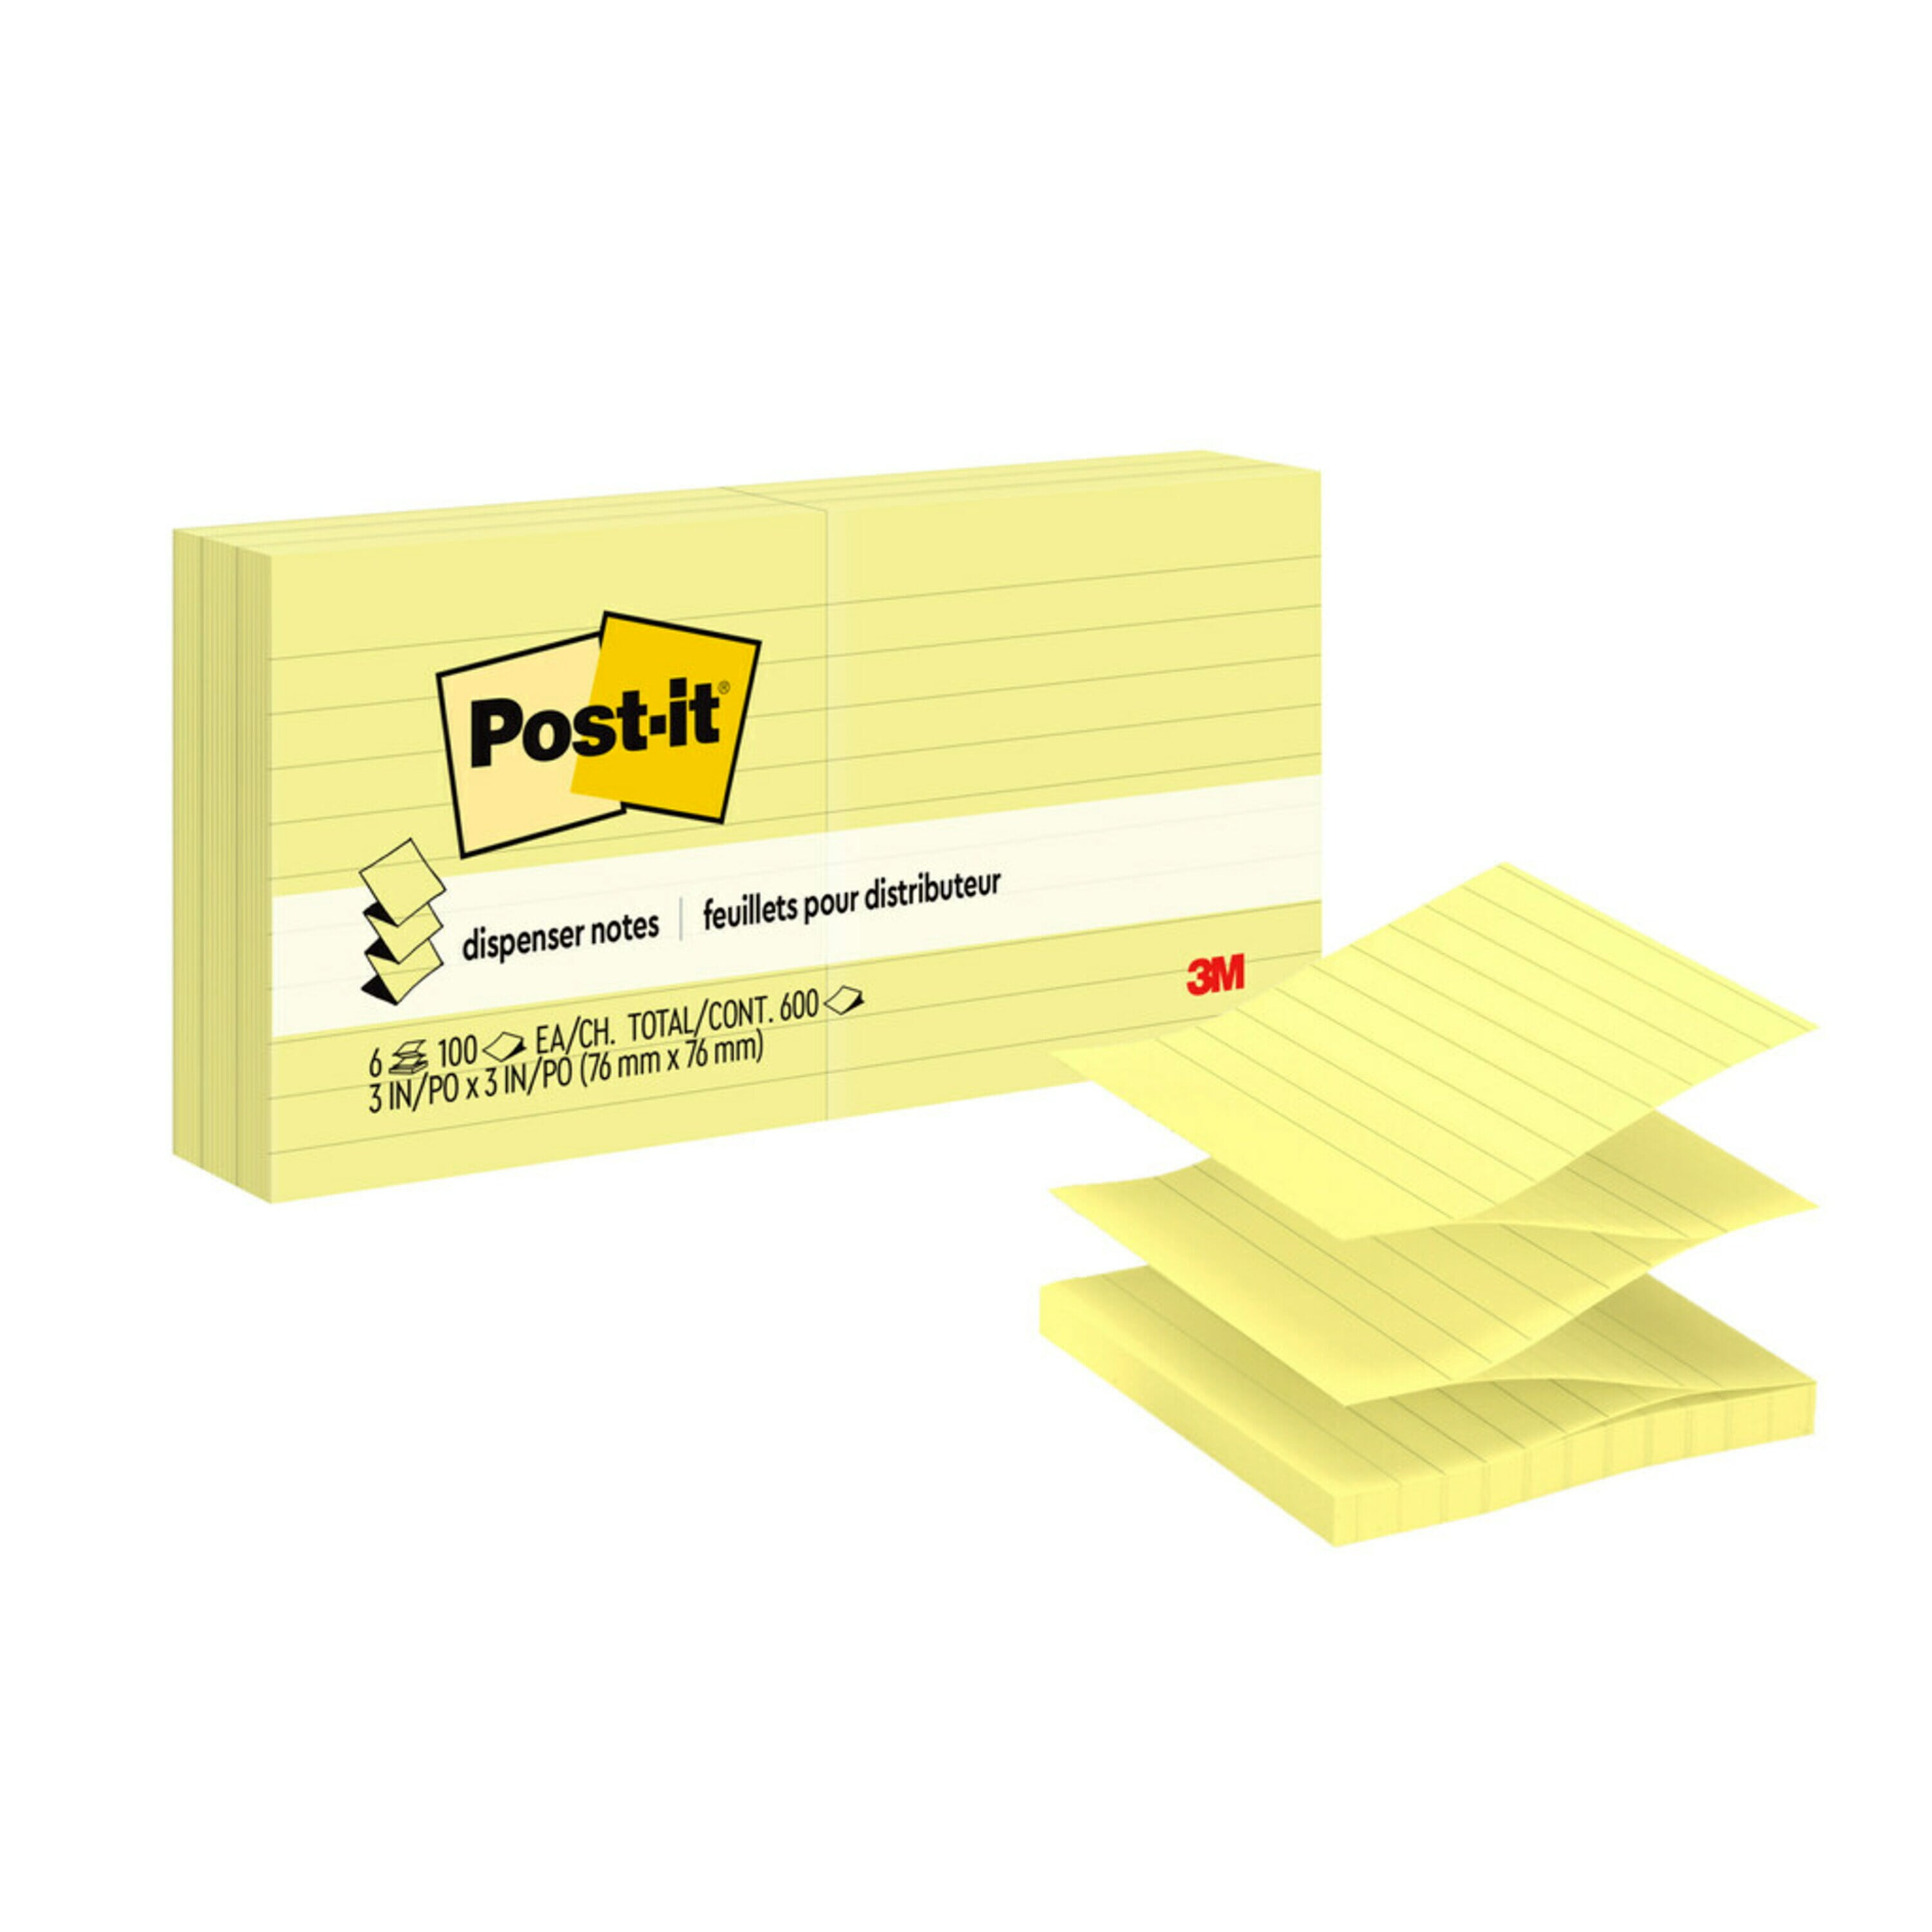 Pop Up Sticky Note Pads With Lined 8 Colors 3 X 3 Inches Sticky